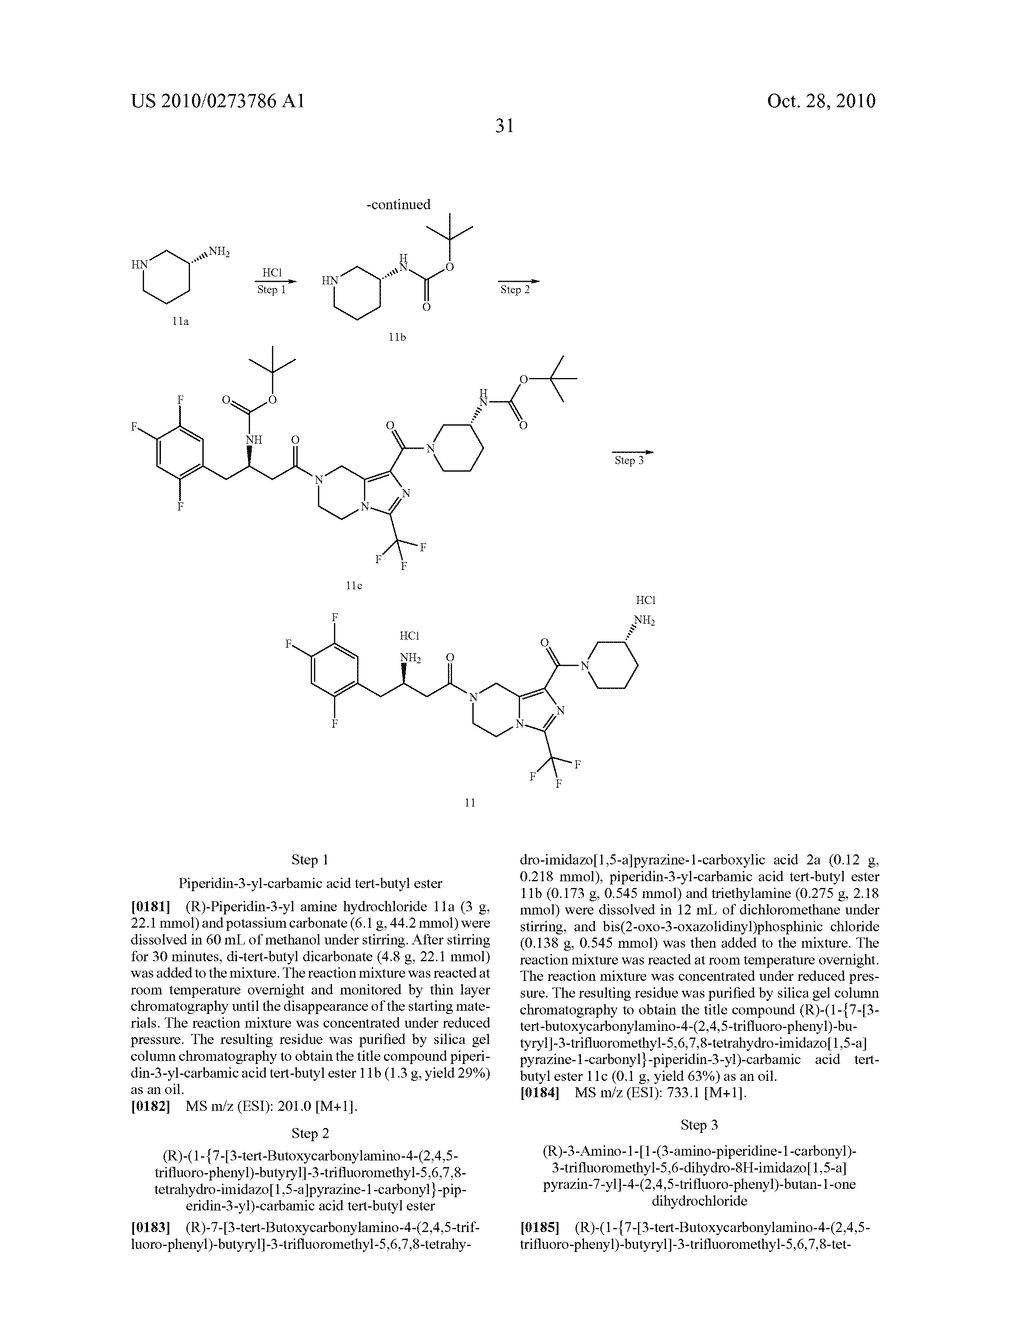 TETRAHYDRO-IMIDAZ0[1,5-A]PYRAZINE DERIVATIVES, PREPARATION PROCESS AND MEDICINAL USE THEREOF - diagram, schematic, and image 32